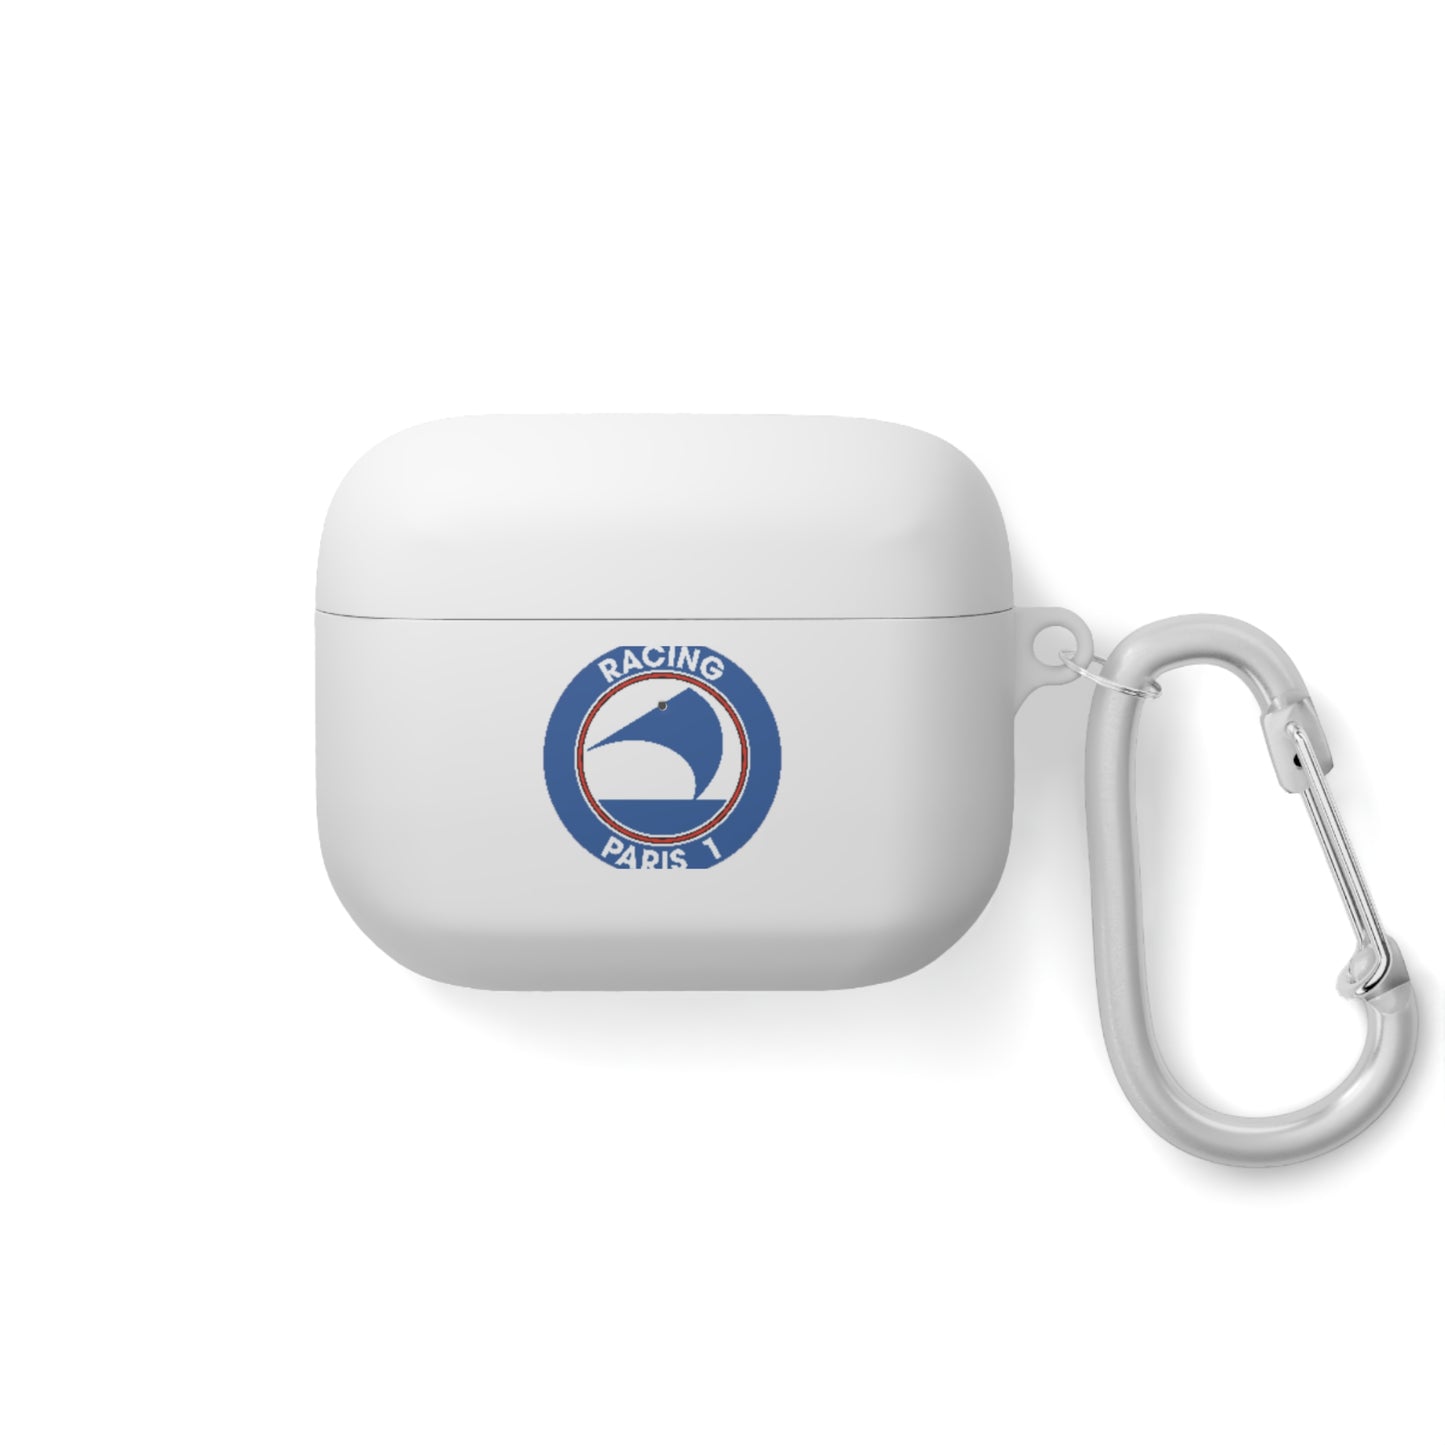 Racing Paris 1 (Rp1) AirPods and AirPods Pro Case Cover